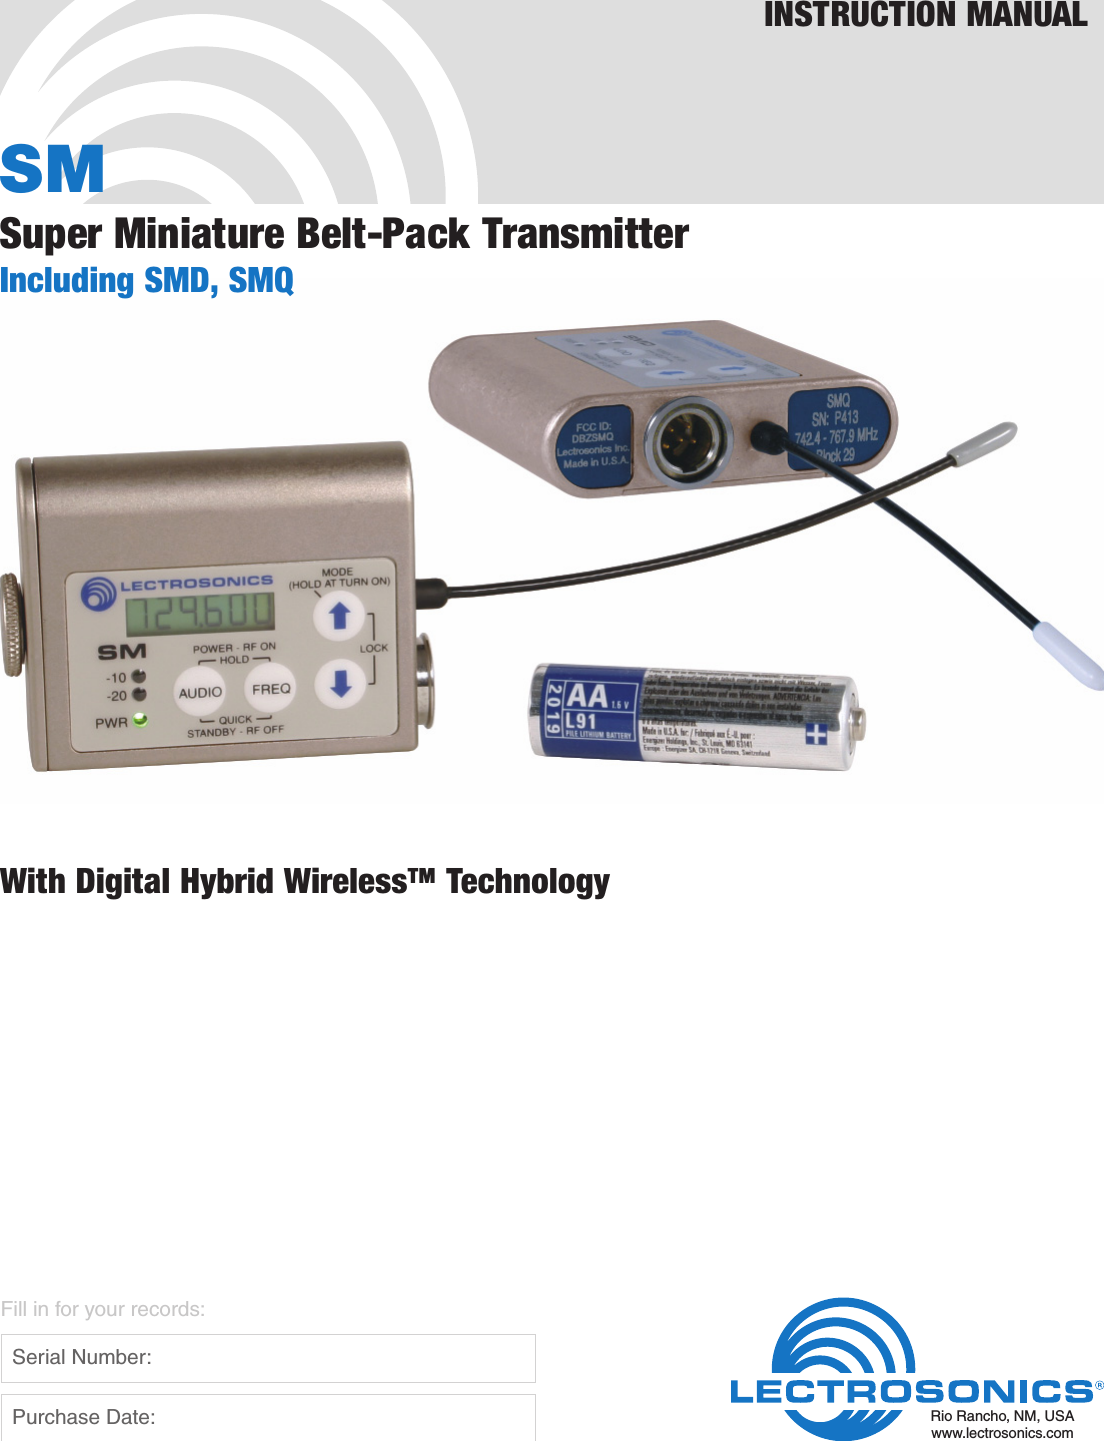 SMSuper Miniature Belt-Pack TransmitterIncluding SMD, SMQWith Digital Hybrid Wireless™ TechnologyINSTRUCTION MANUALRio Rancho, NM, USAwww.lectrosonics.comFill in for your records:  Serial Number:  Purchase Date: